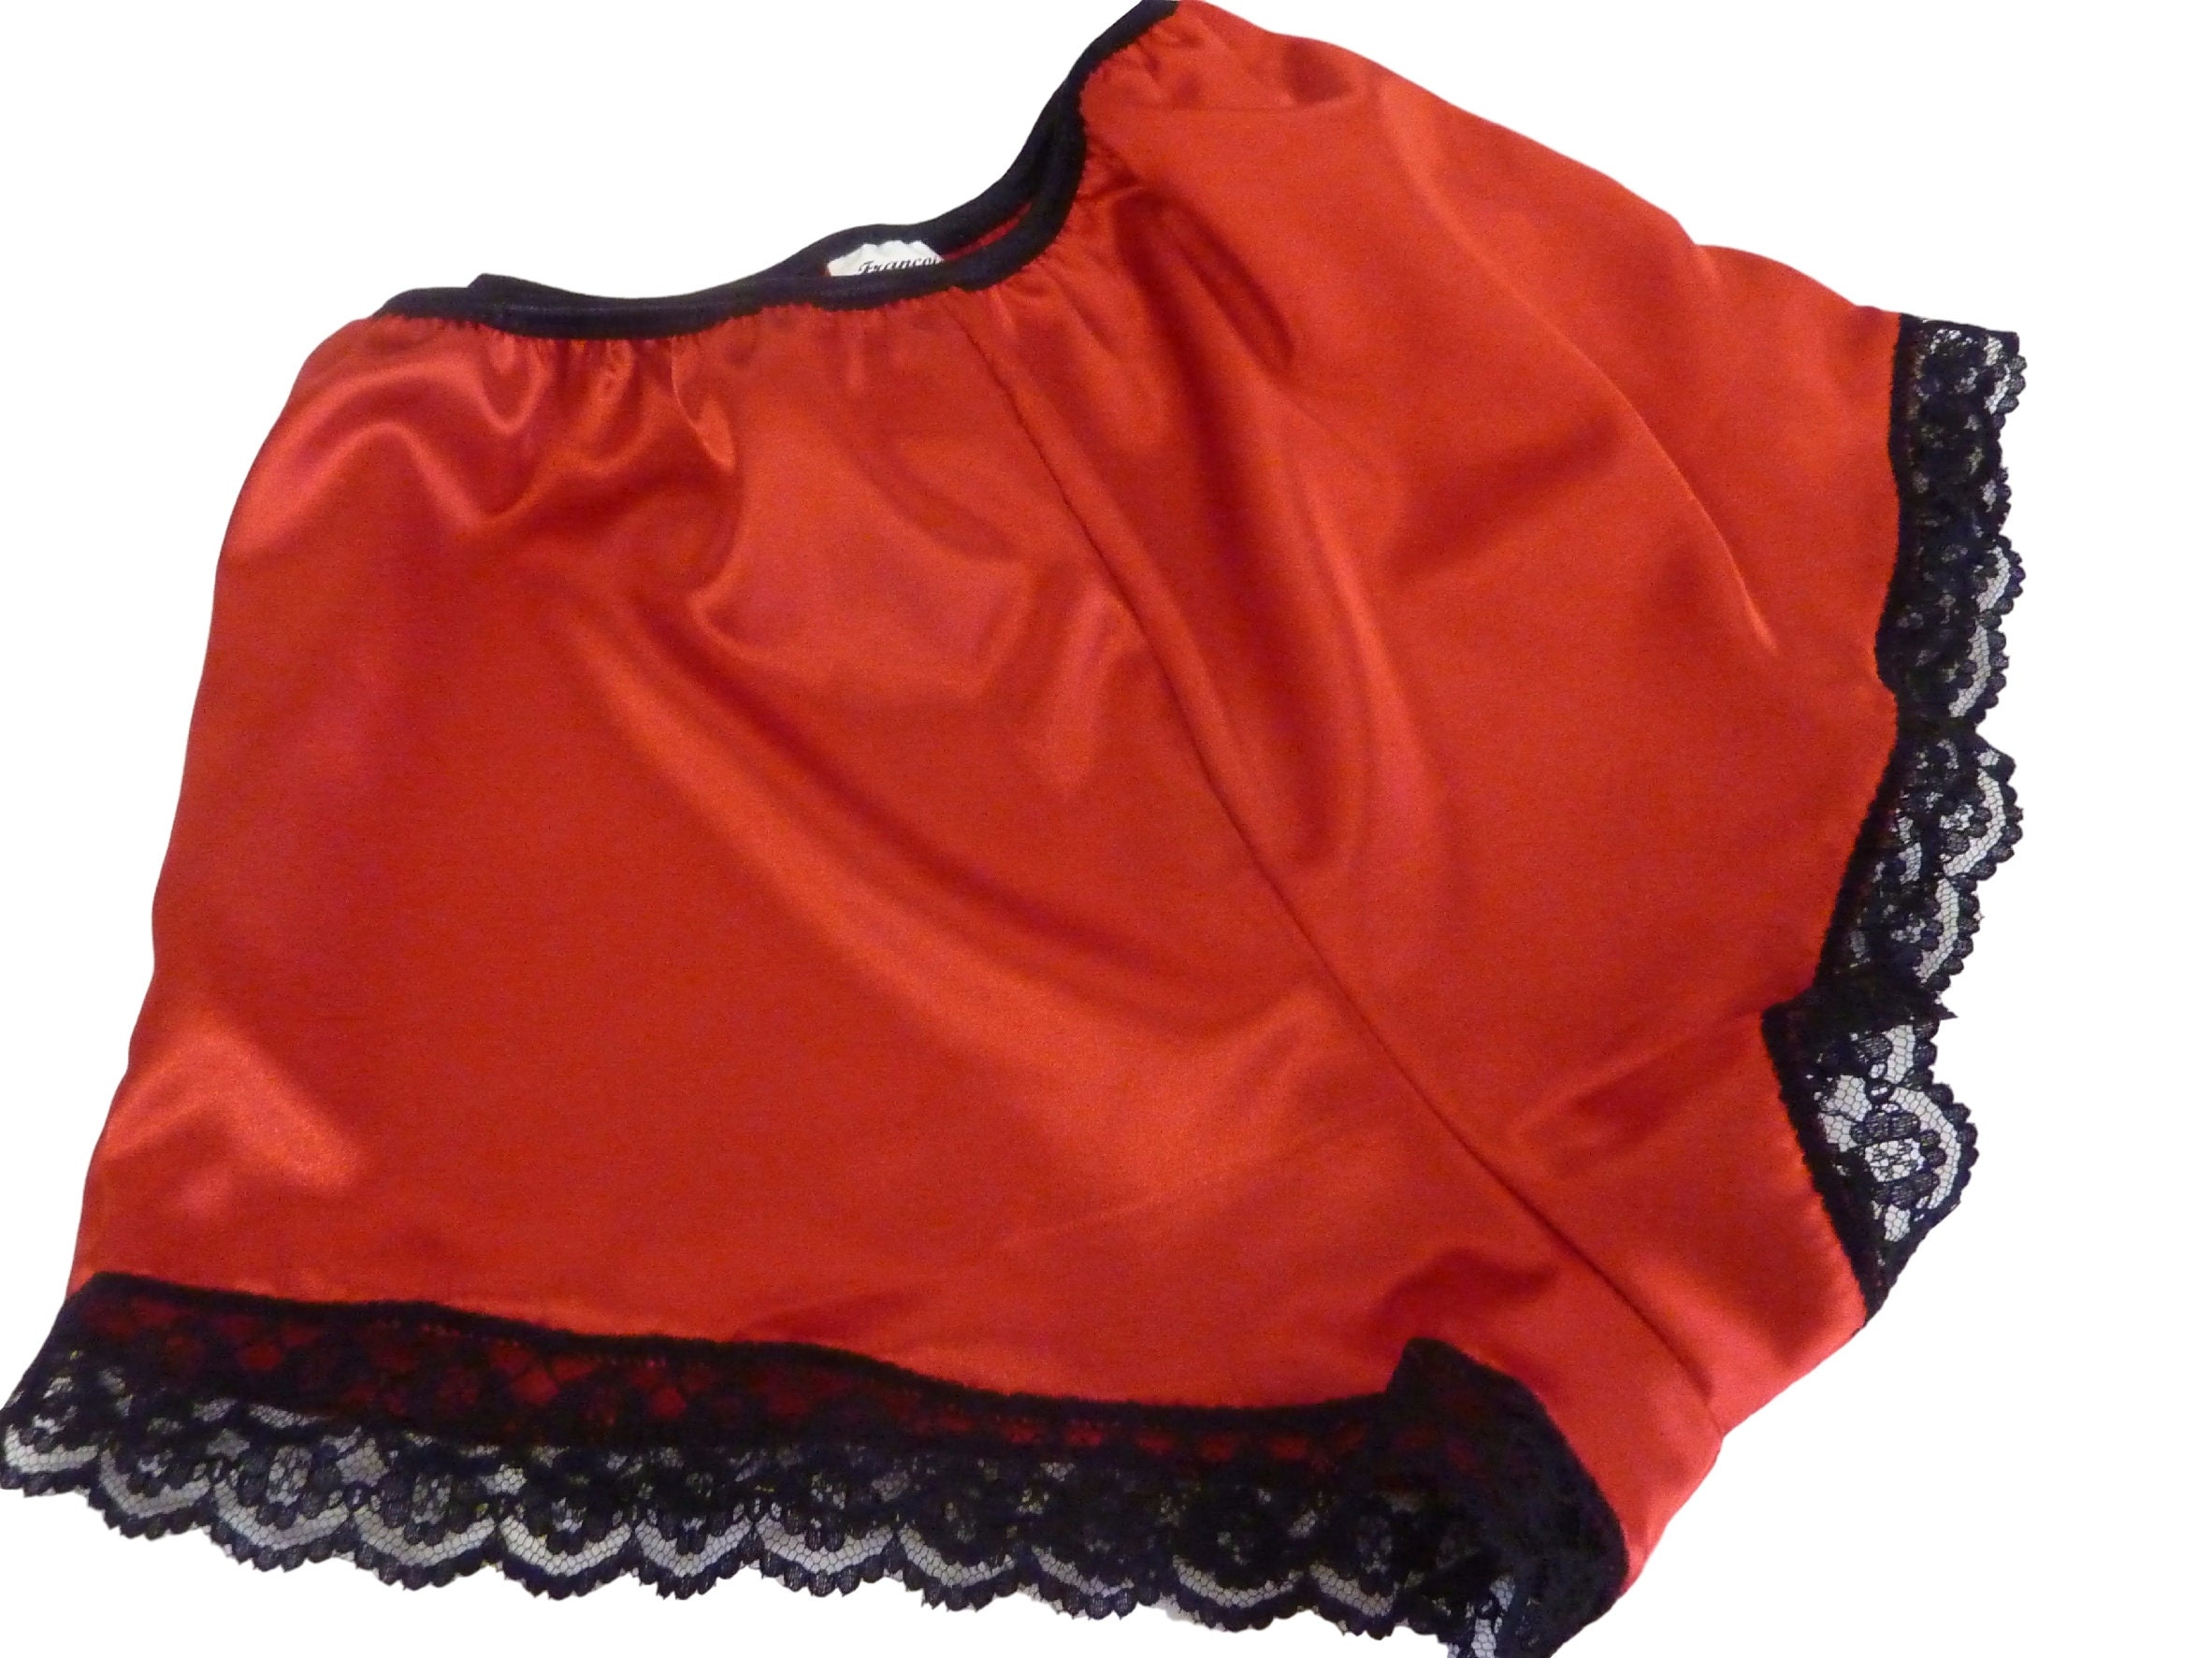 Bright Red Shiny Satin High Cut French Knicker With Black Lace